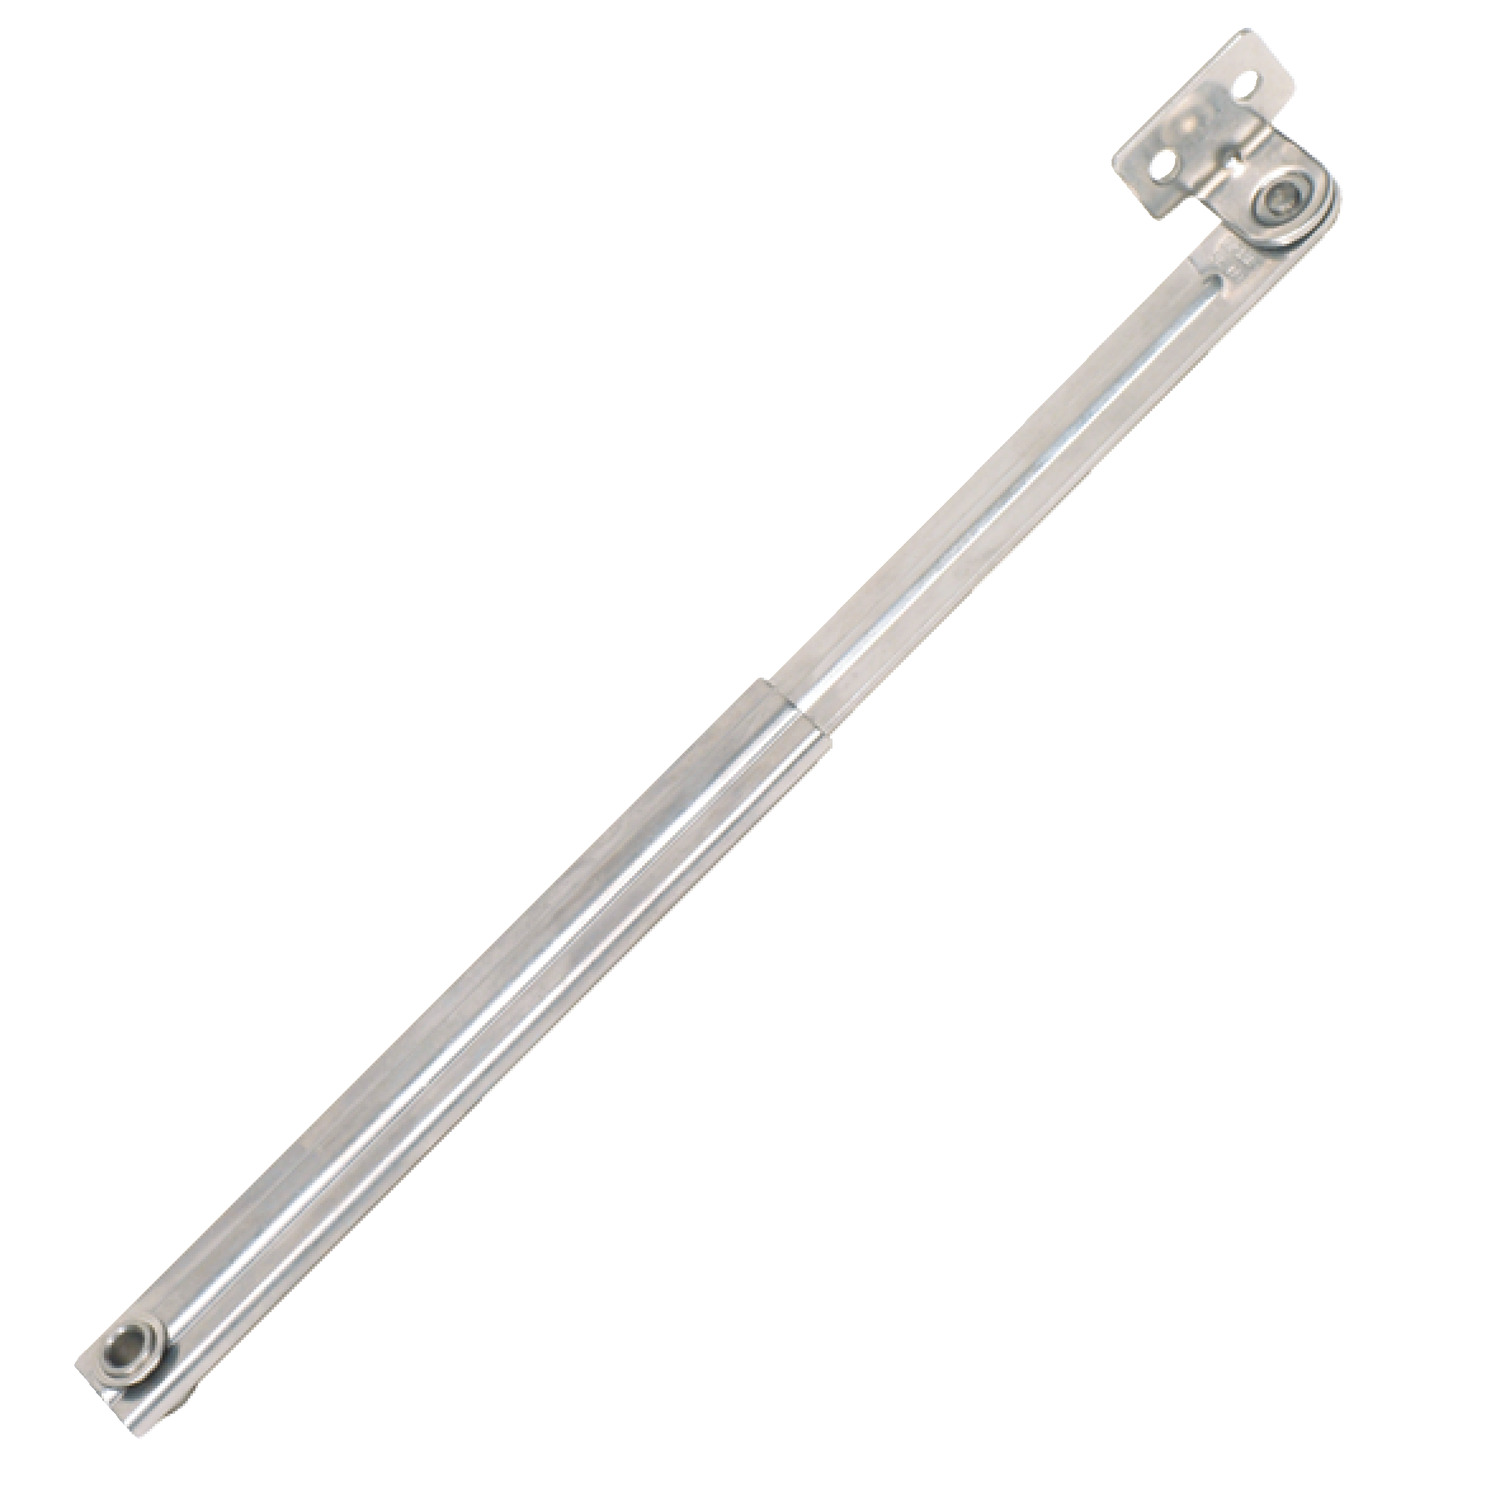 N0940.AC0200 Lid Stays Stainless Steel Positive stop - 200. 80deg.  max. opening angle